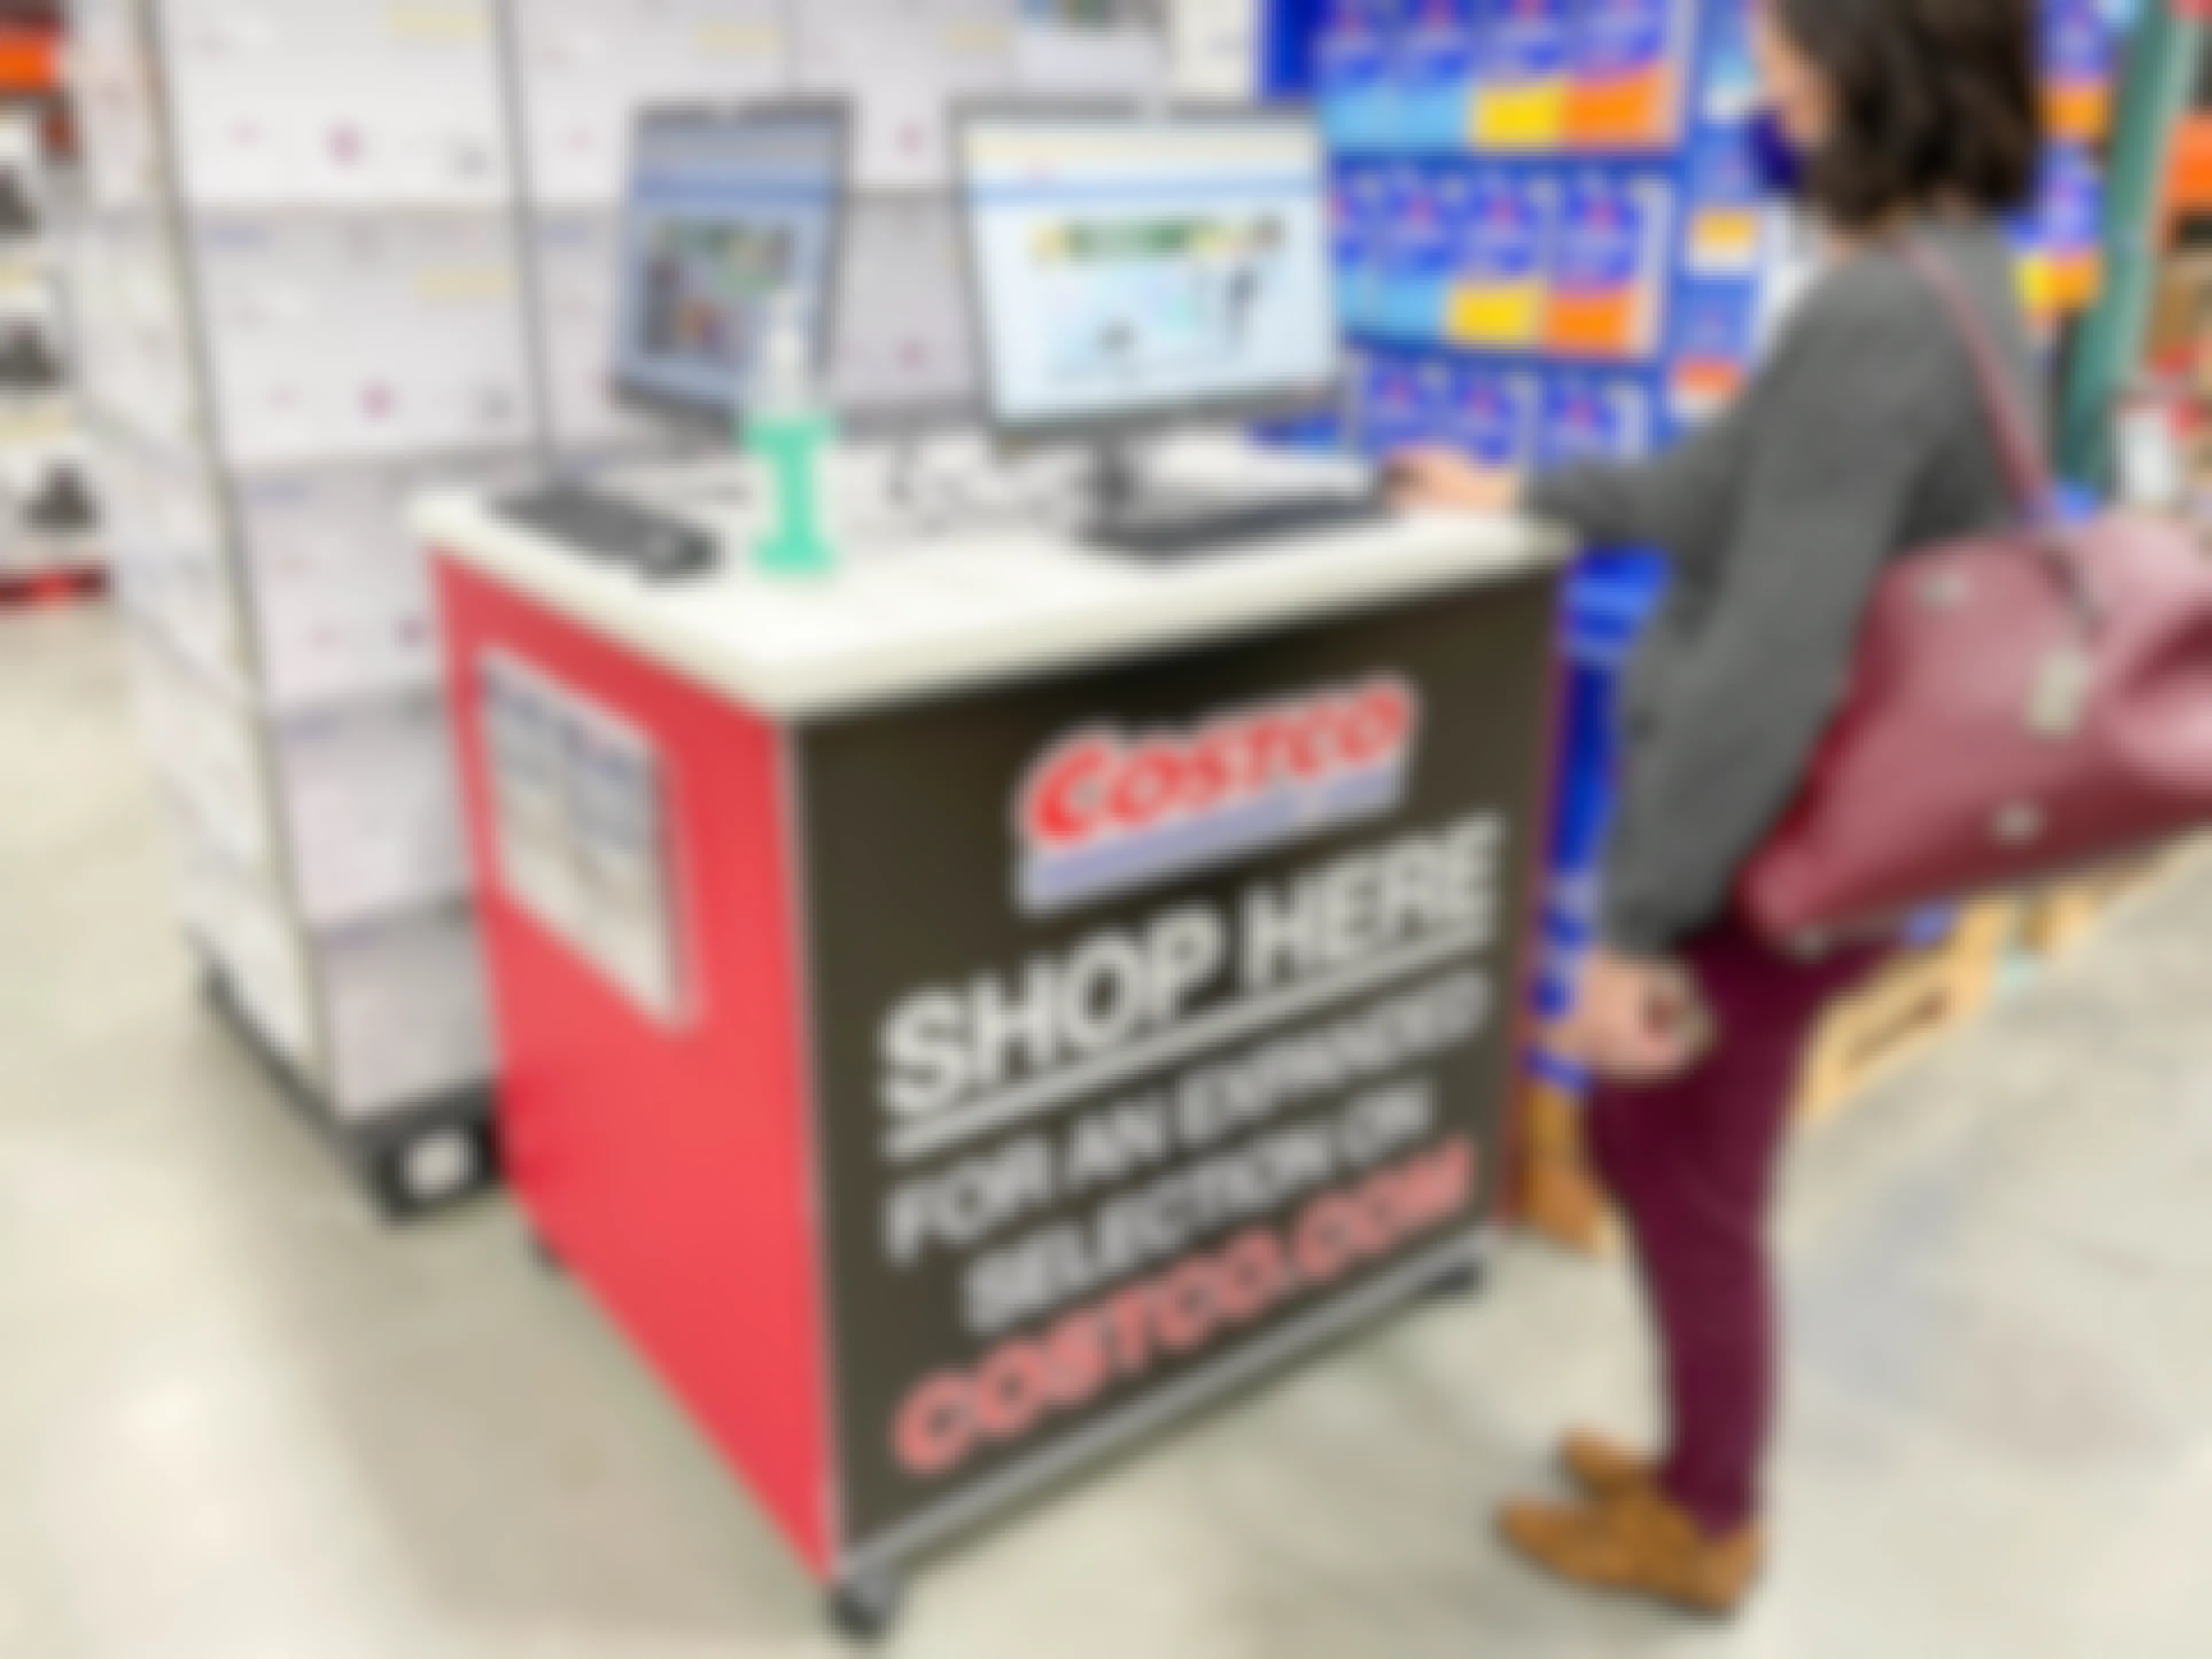 A woman standing at the Costco.com shop her Kiosk in store